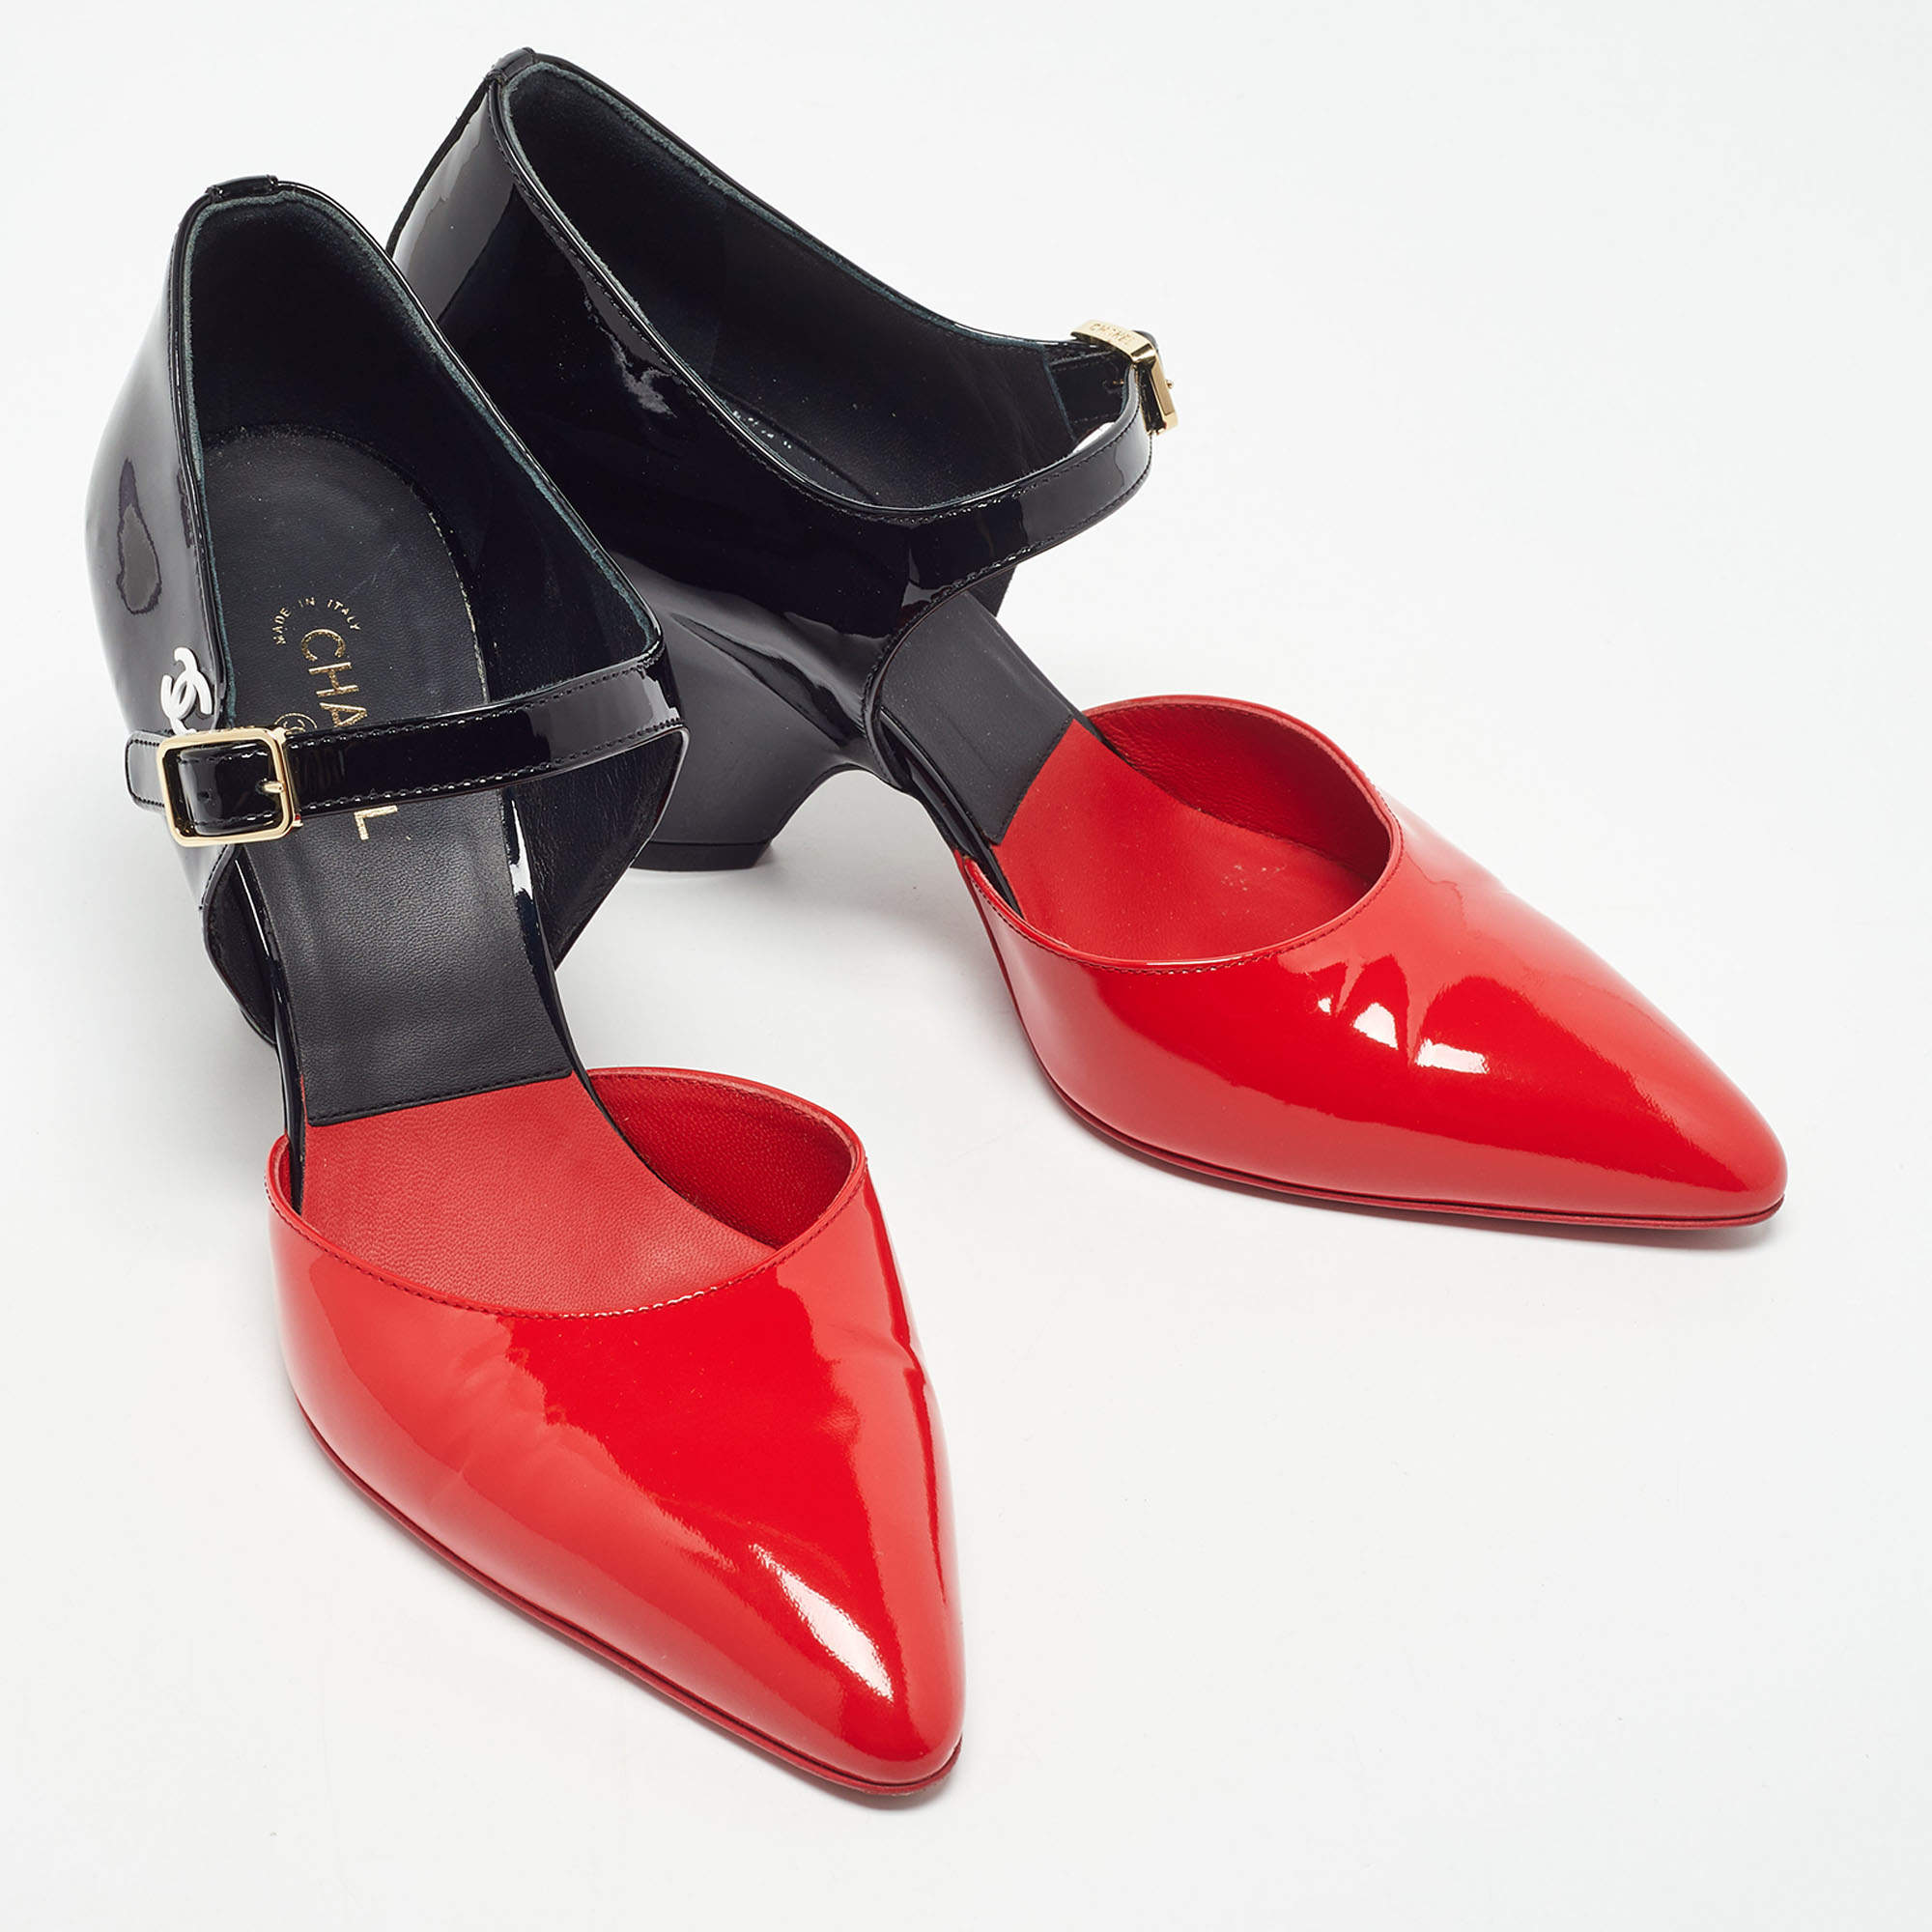 Chanel Red/Black Patent Leather Mary Jane Wedge Pumps Size 38.5